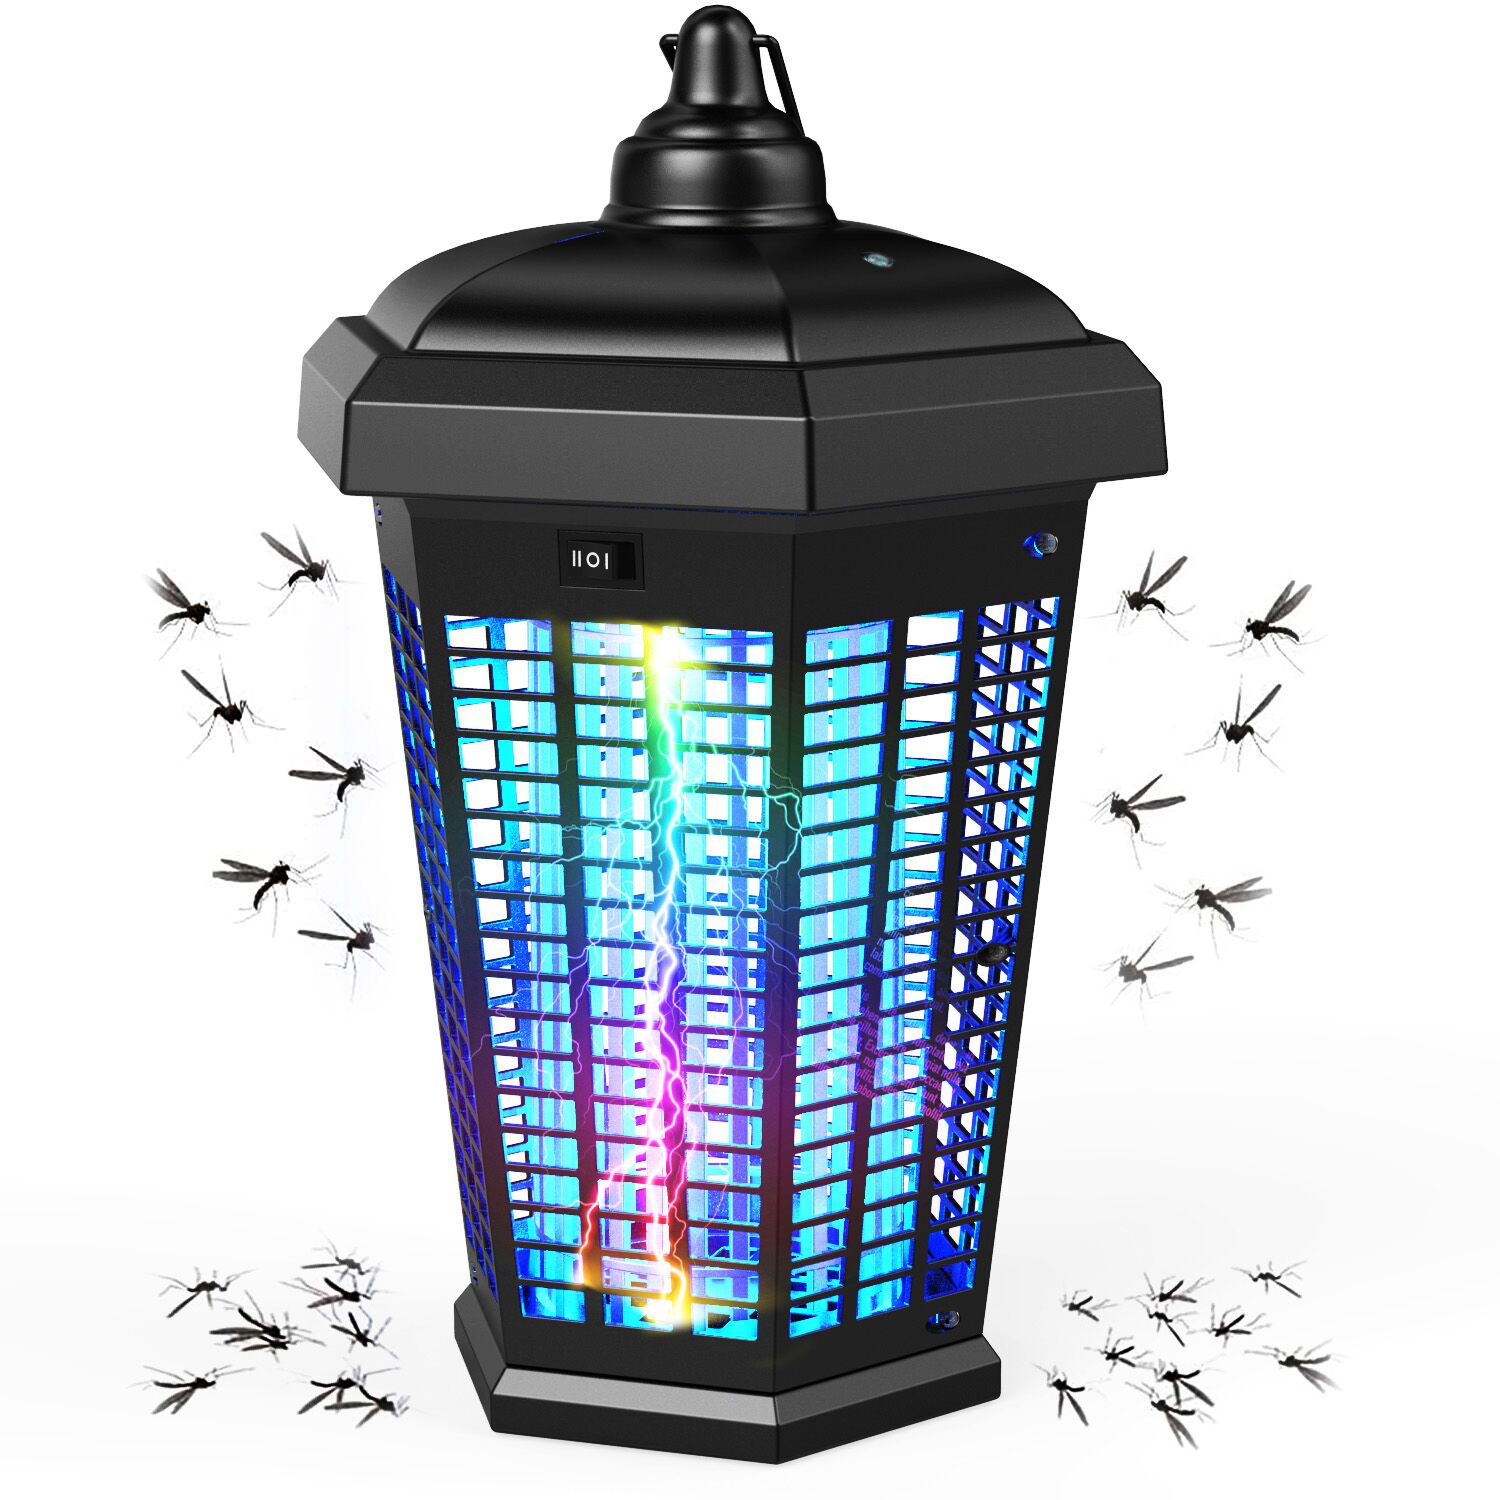 MAGIC CAT Bug Zapper Outdoor Electric, Waterproof 4000V Mosquito Zapper with Light Sensor, Insect Killer Lamp Fly Trap Zapper with ON/Off Switch Mosquito Killer Lamp for Backyard, Patio & Indoor Use